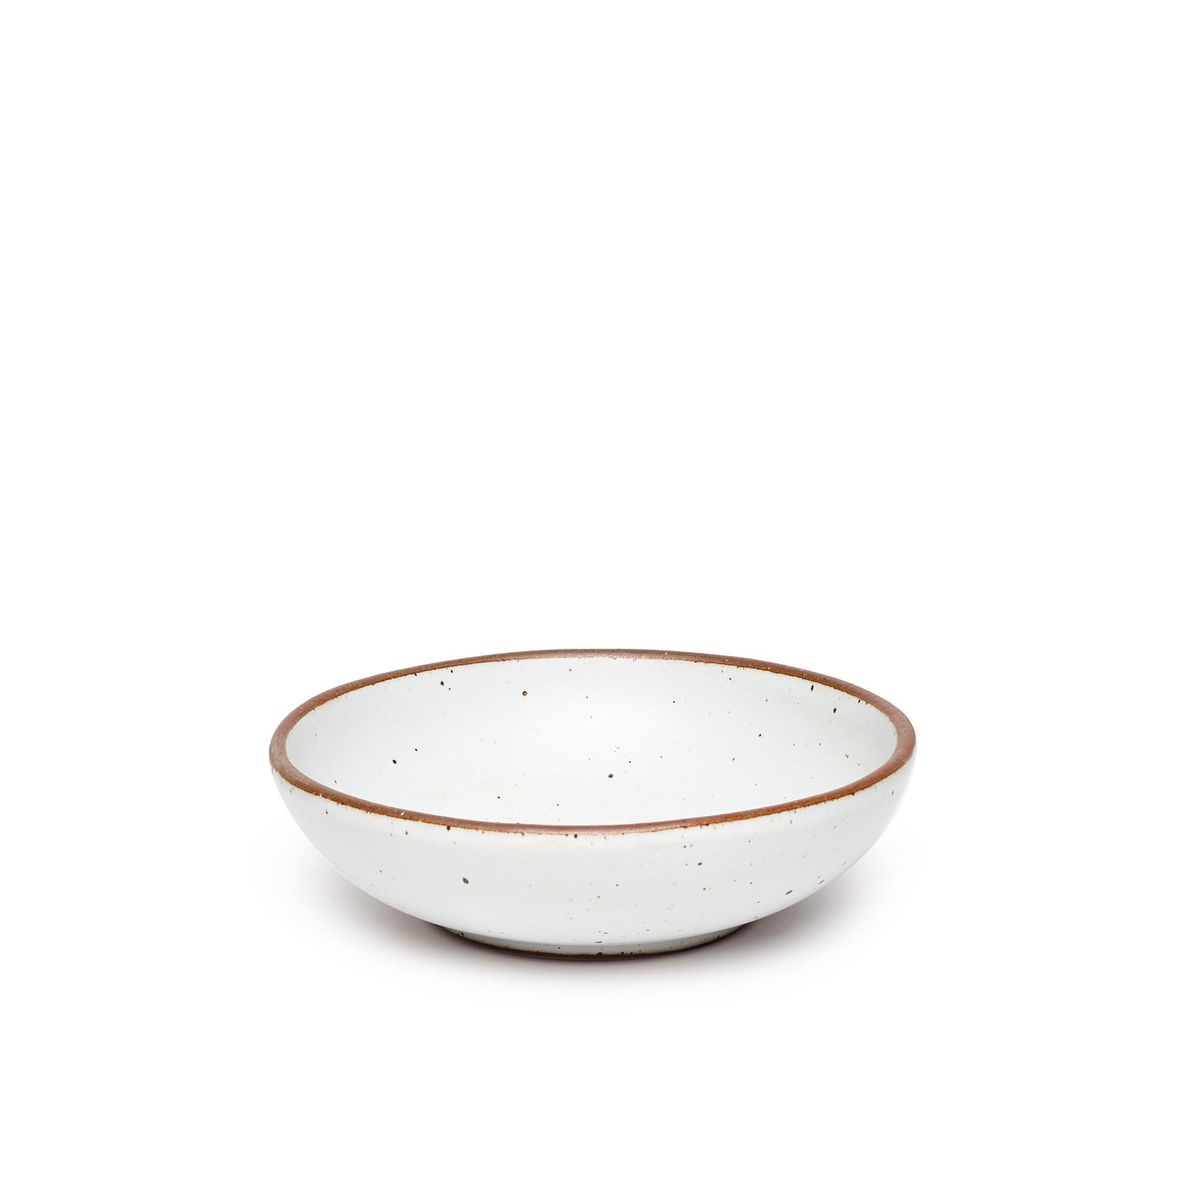 A dinner-sized shallow ceramic bowl in a cool white color featuring iron speckles and an unglazed rim